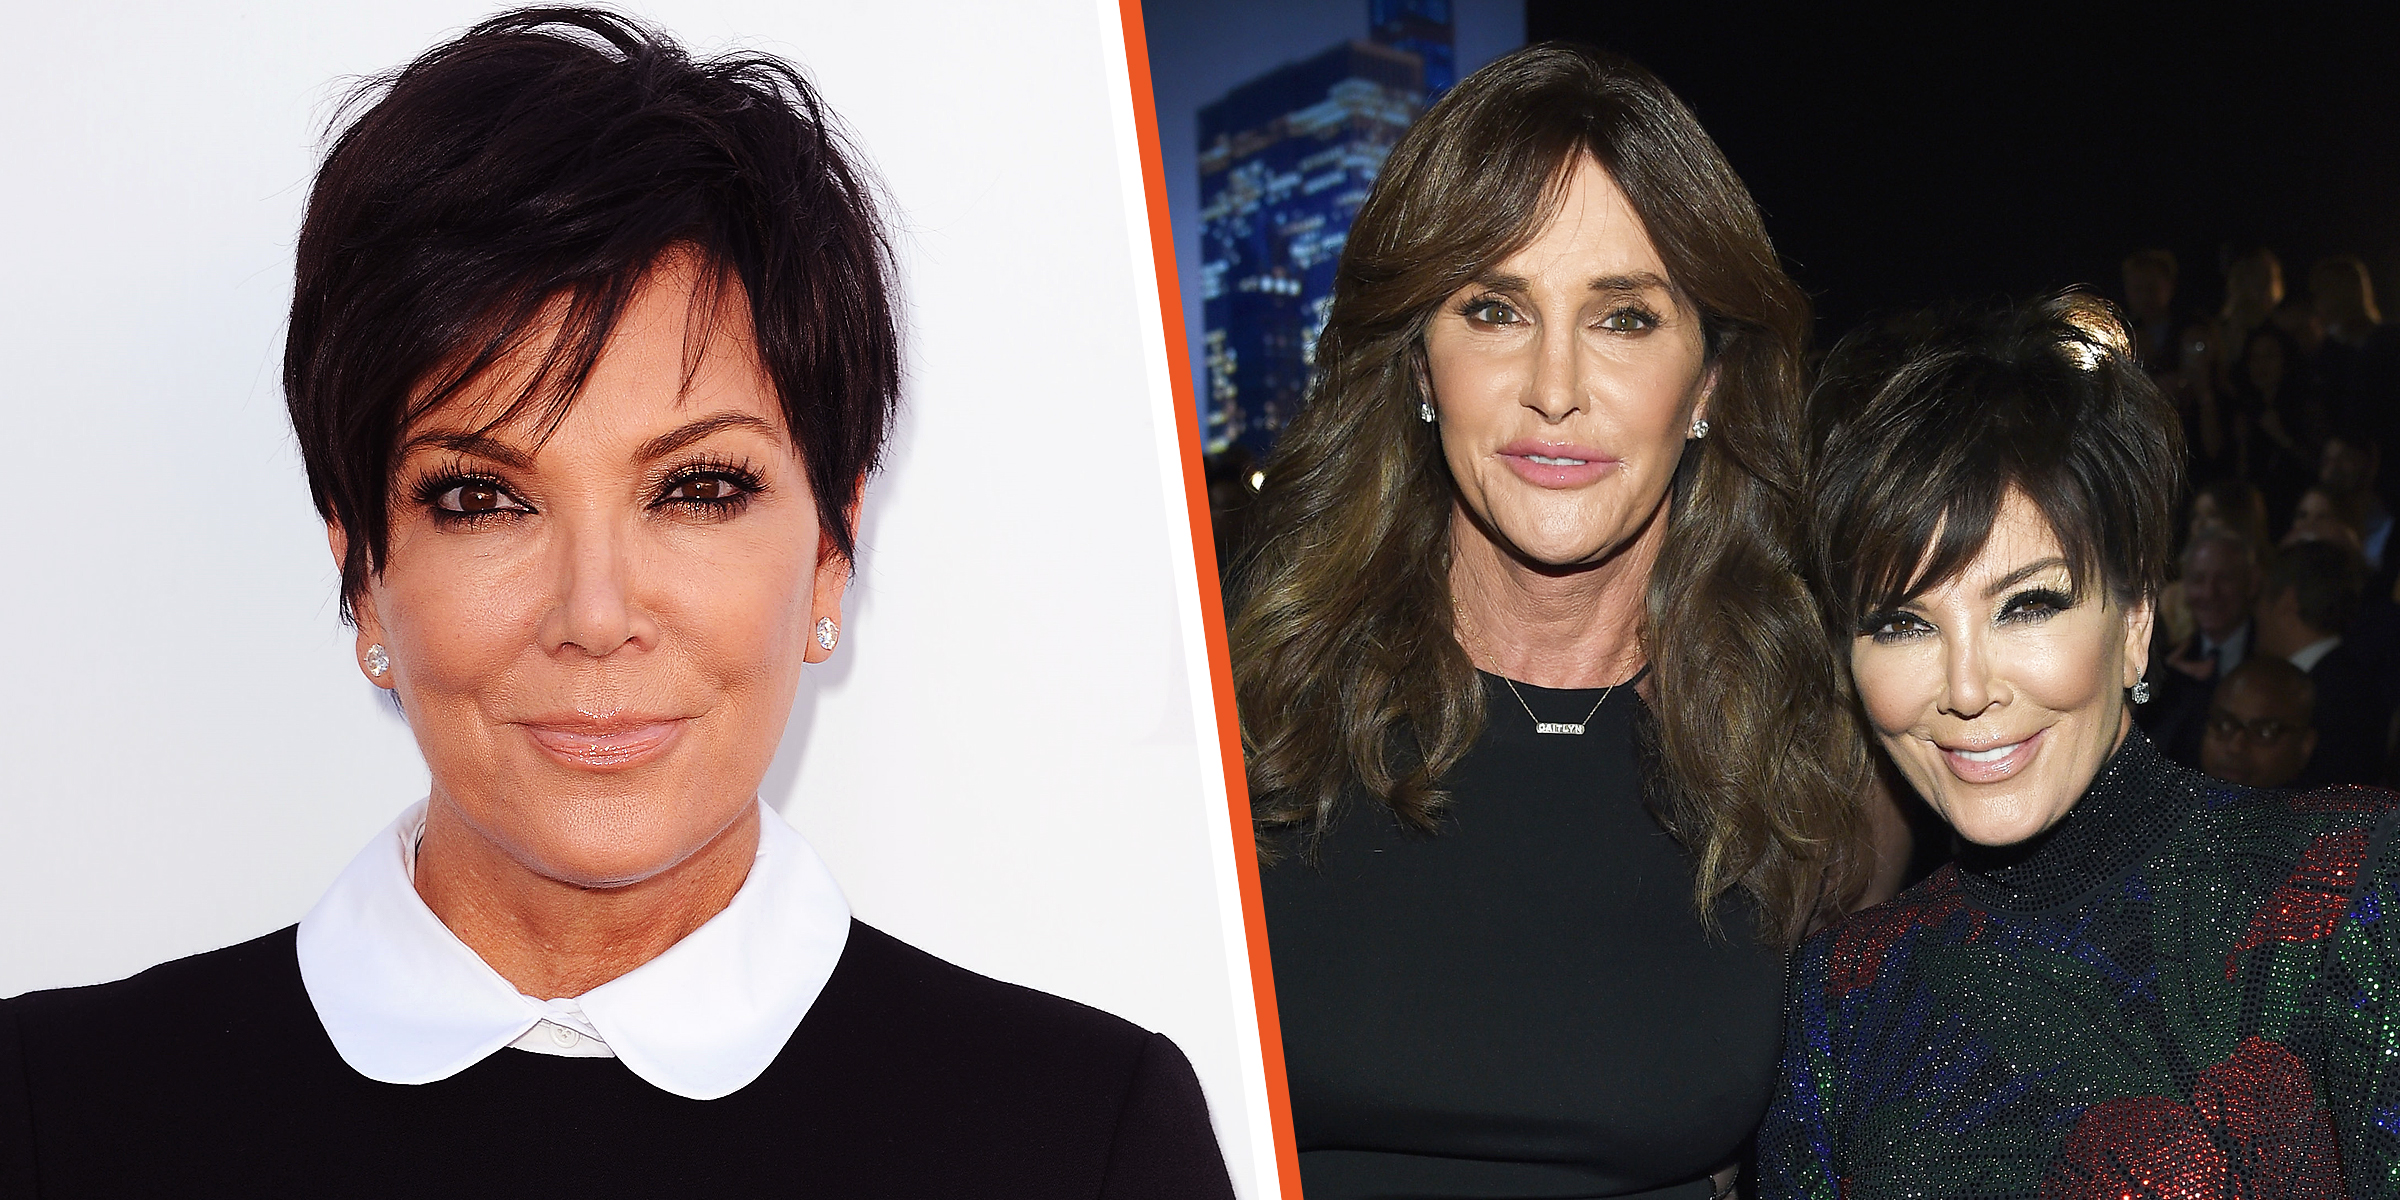 Kris Jenner | Caitlyn Jenner and Kris Jenner | Source: Getty Images